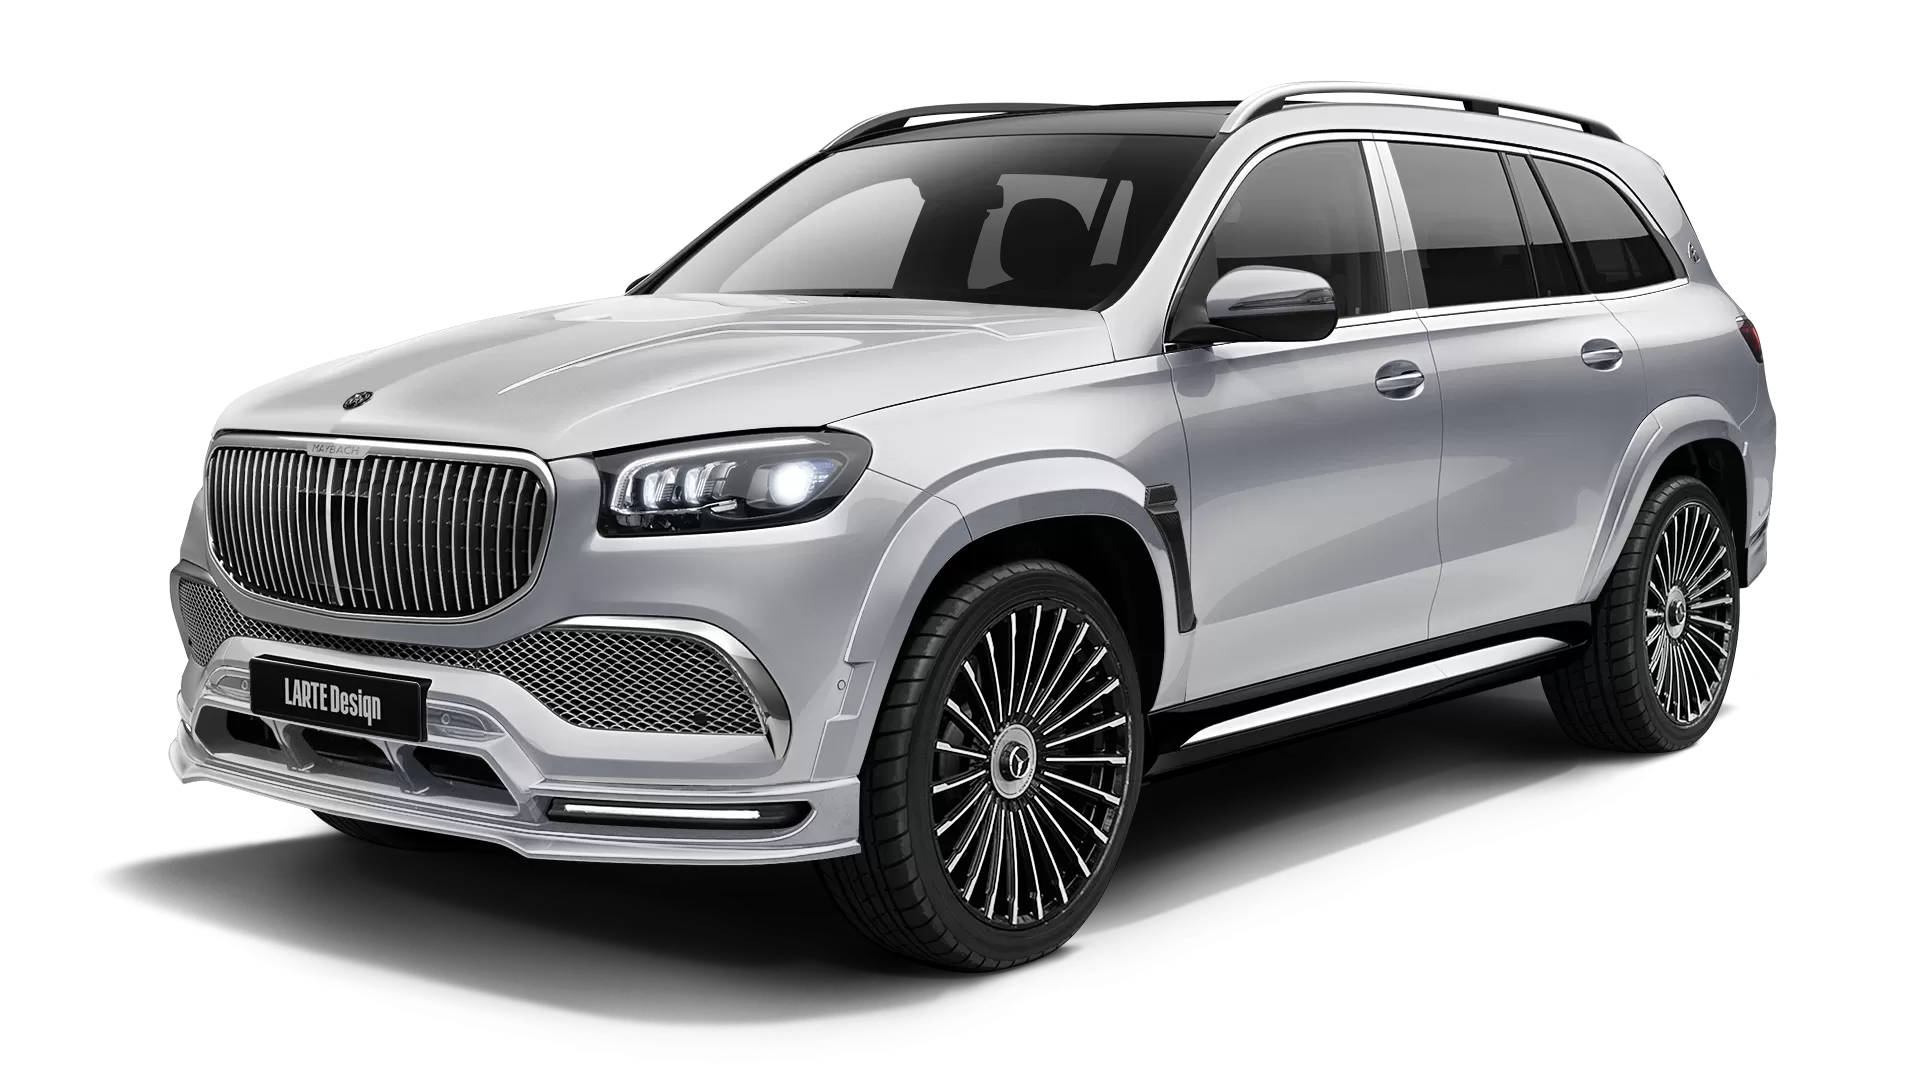 Mercedes Maybach GLS 600 with painted body kit: front view shown in High Tech Silver